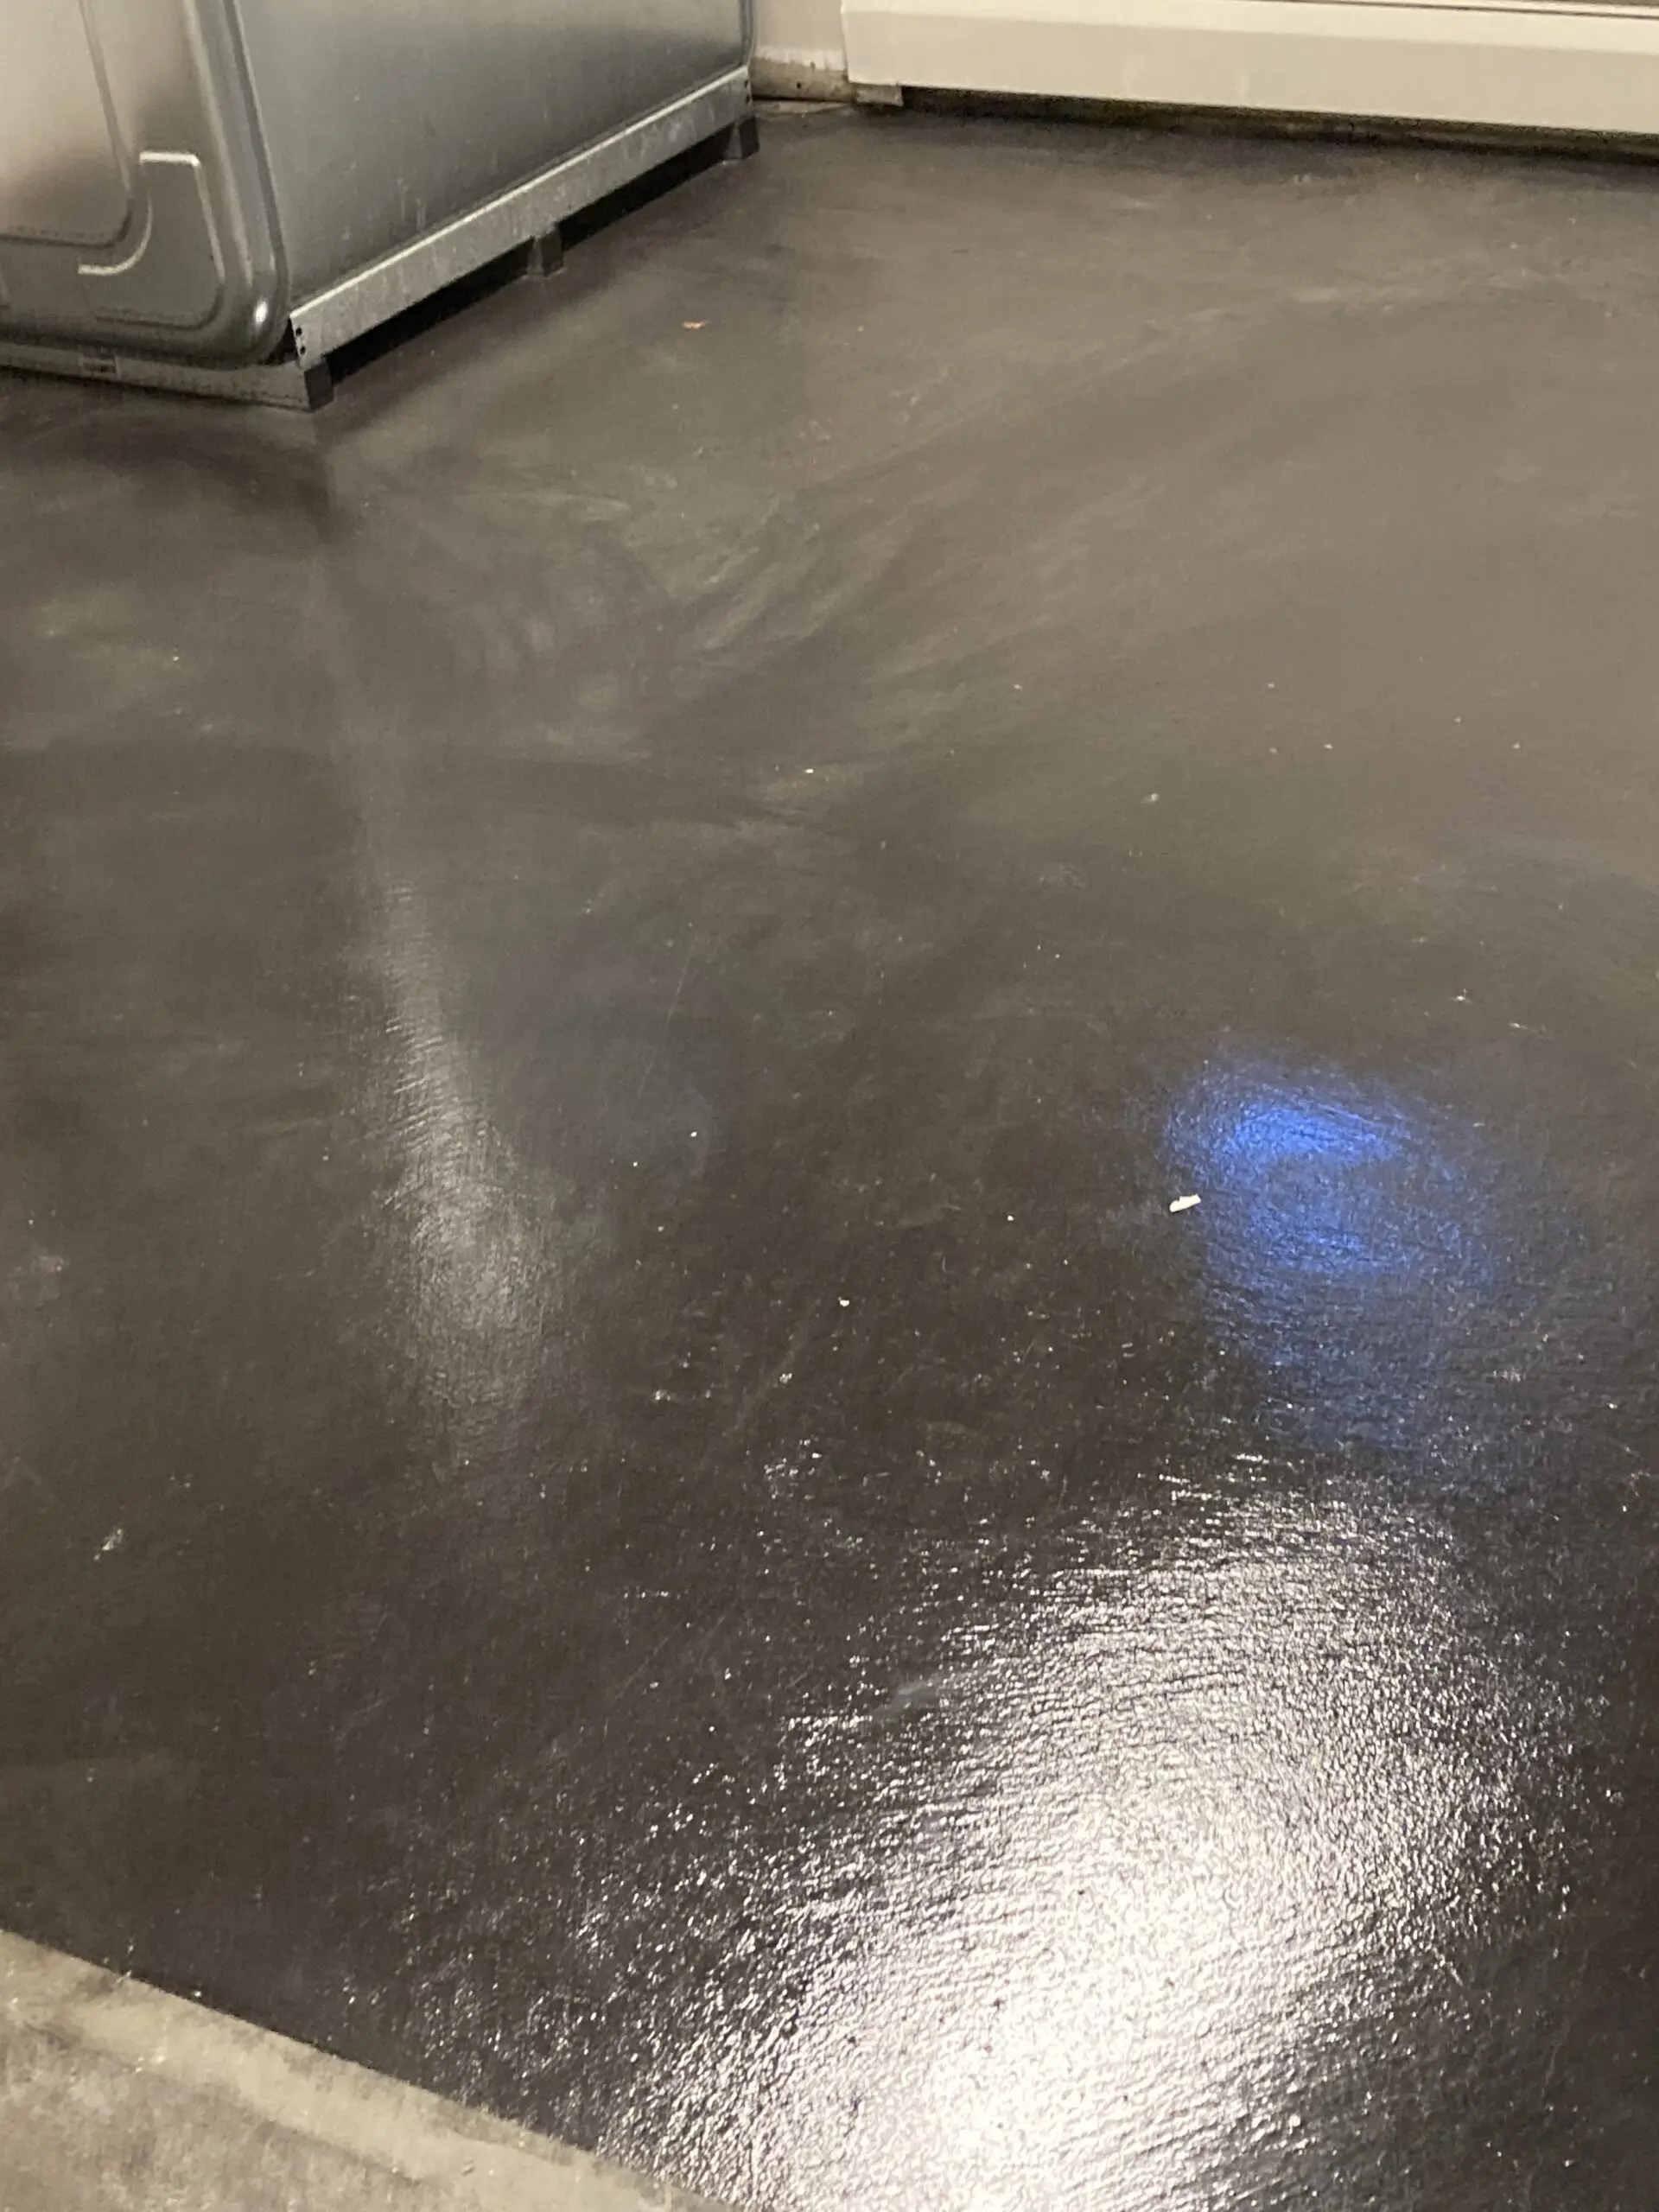 Revamped basement floor after treatment with Charcoal AcquaTint